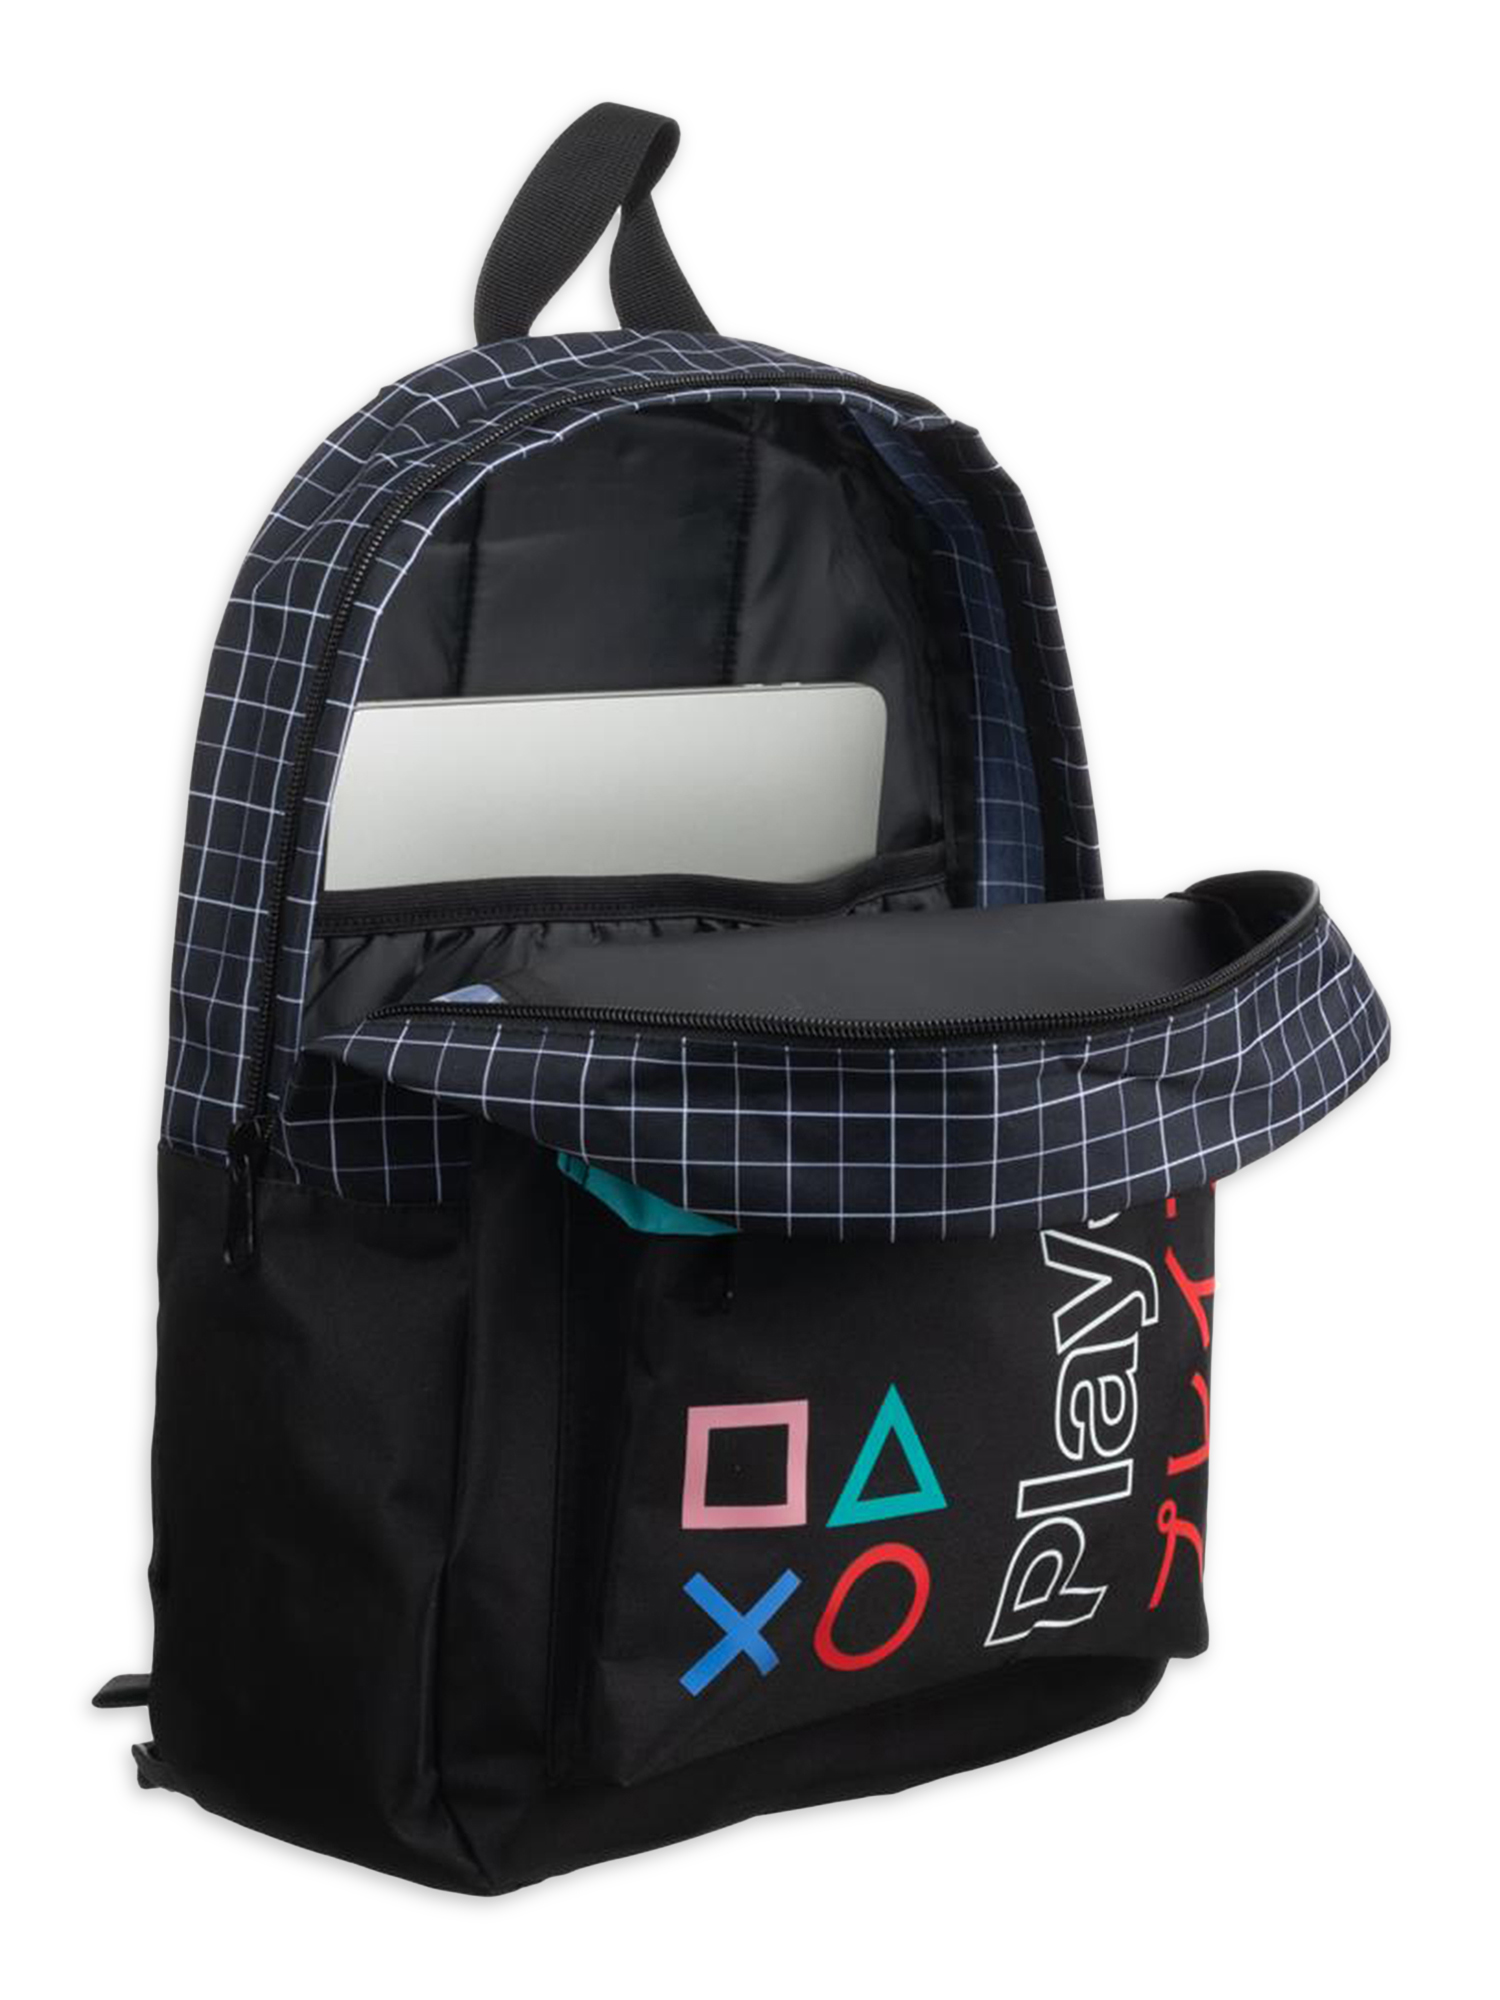 Sony PlayStation 16.5" Black Laptop Backpack with Adjustable Straps - image 2 of 2